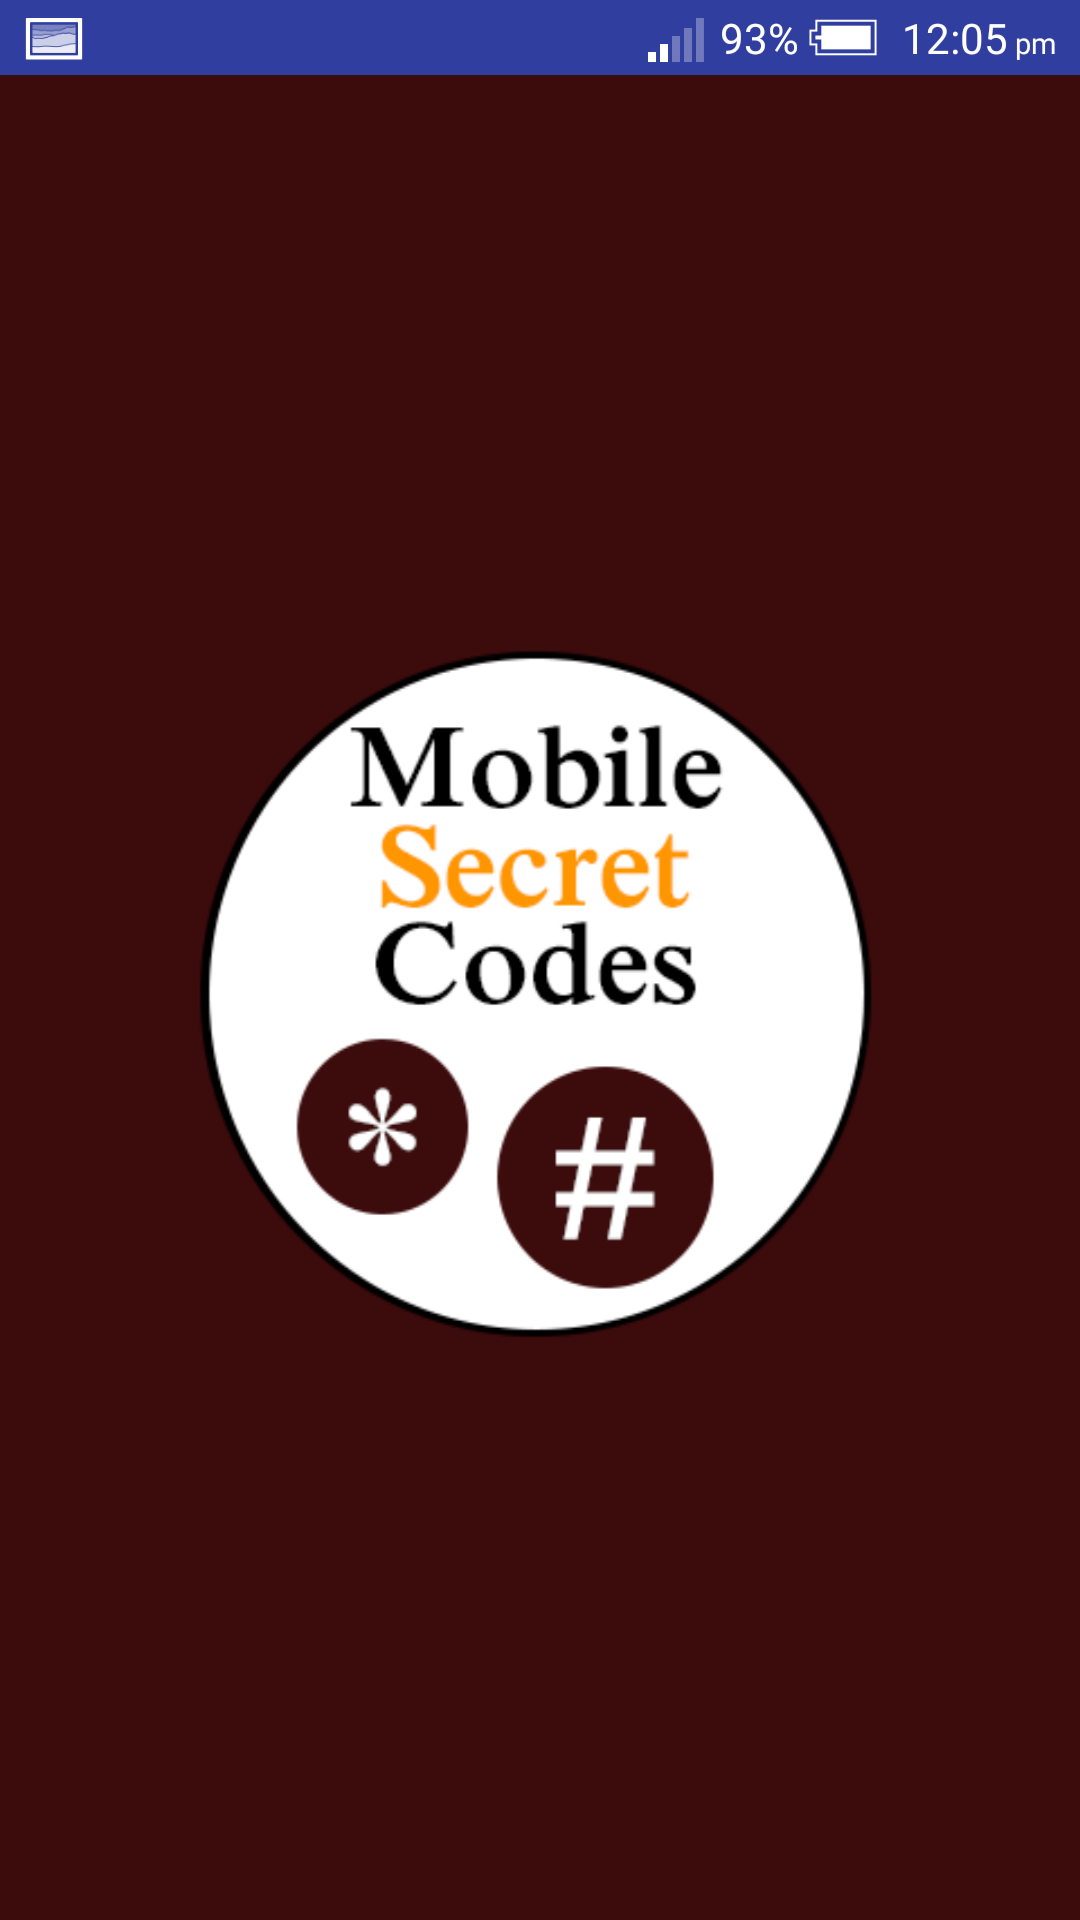 All Mobile Secret Codes 2019 for Android - APK Download - 